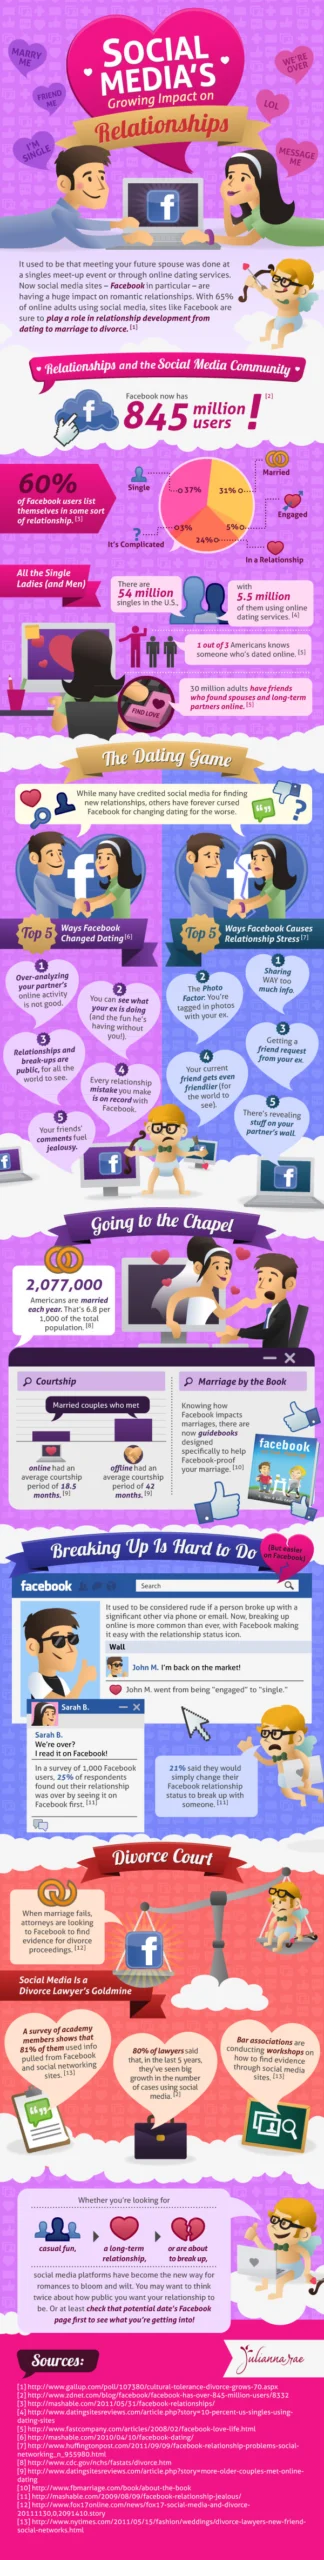 Social Media’s Growing Impact On Relationships